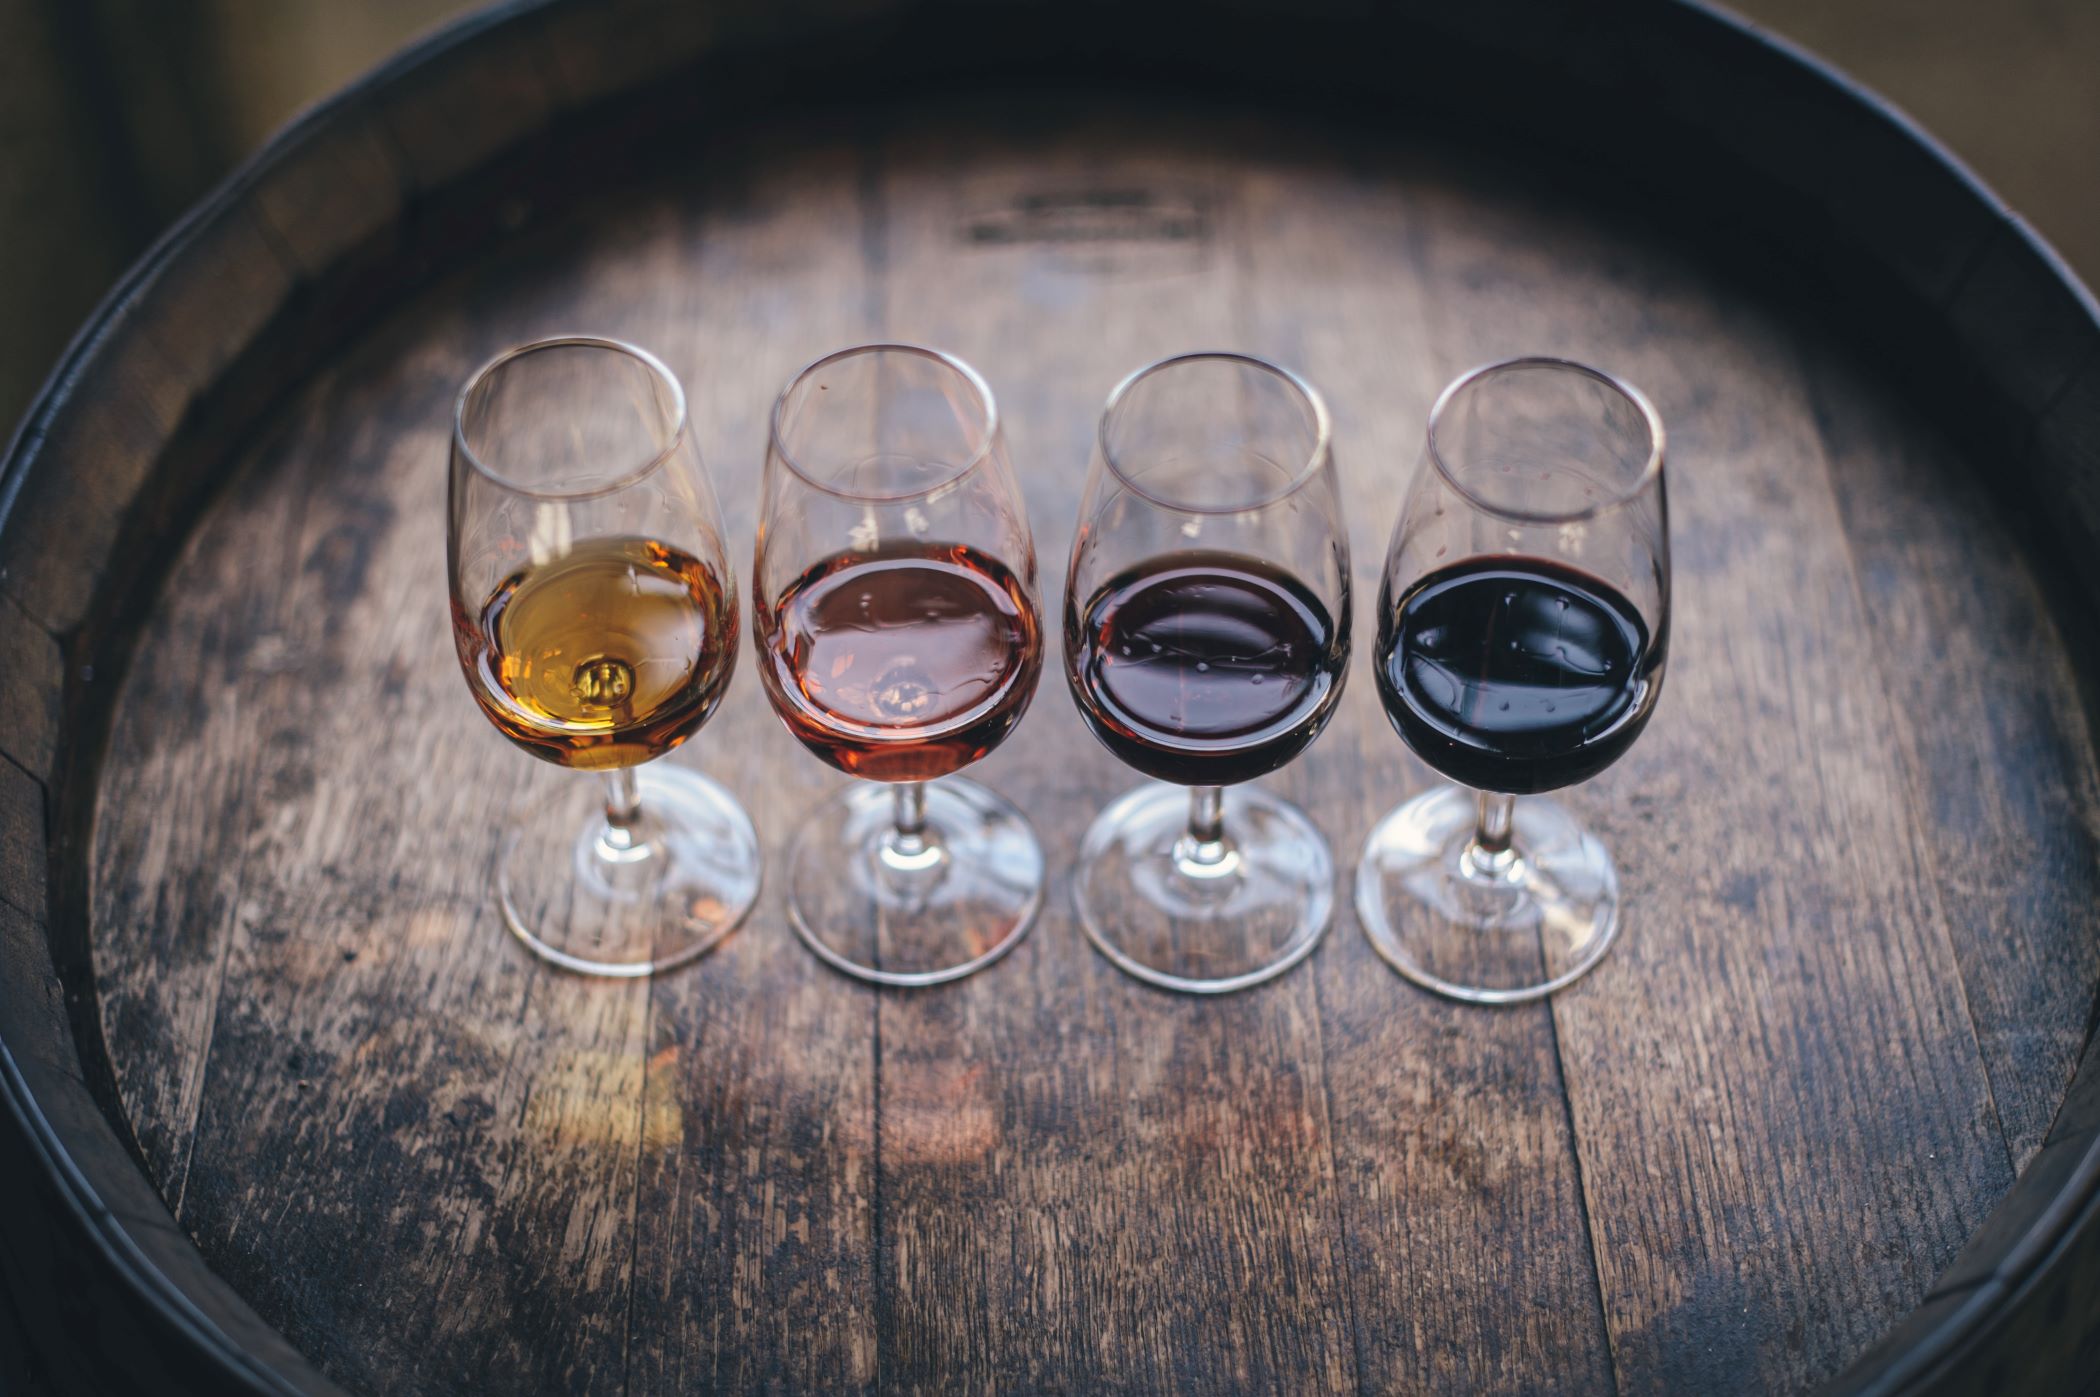 An image of four tasting glasses of wine sitting on top of a barrel.